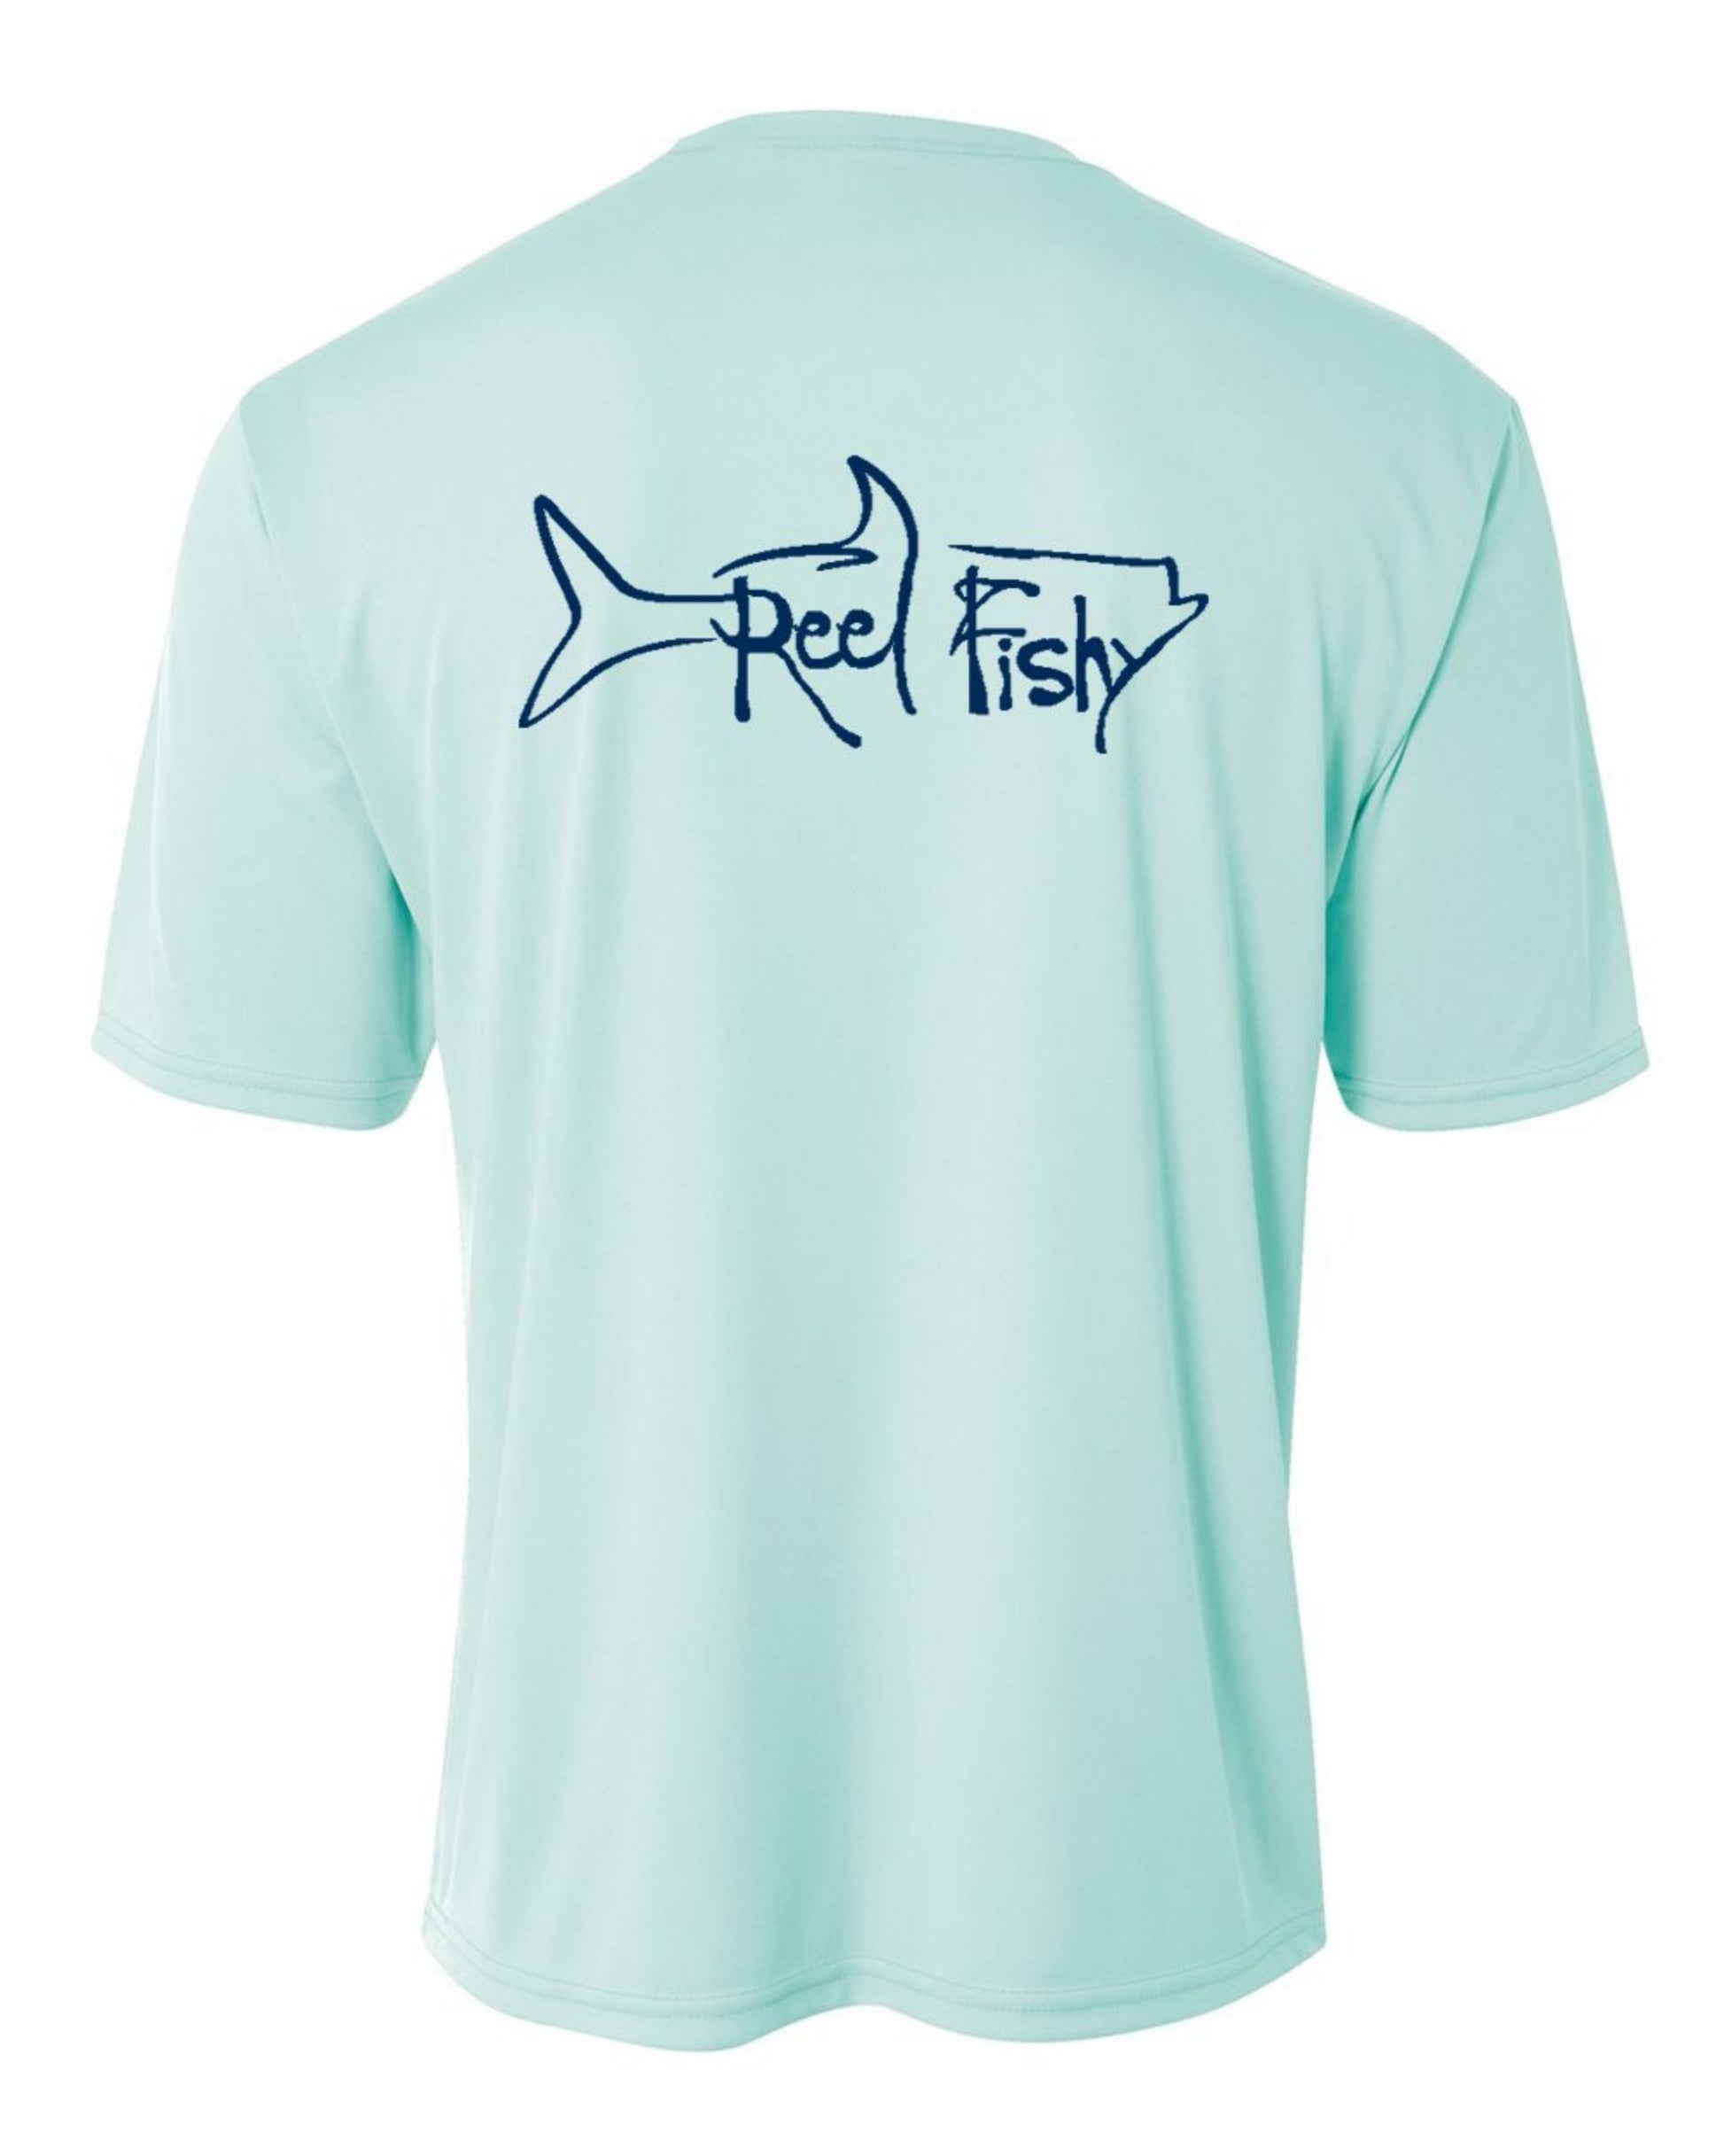 Youth Performance Dry-Fit Tarpon Fishing Shirts 50+Upf Sun Protection - Reel Fishy Apparel S / Pastel Mint S/S